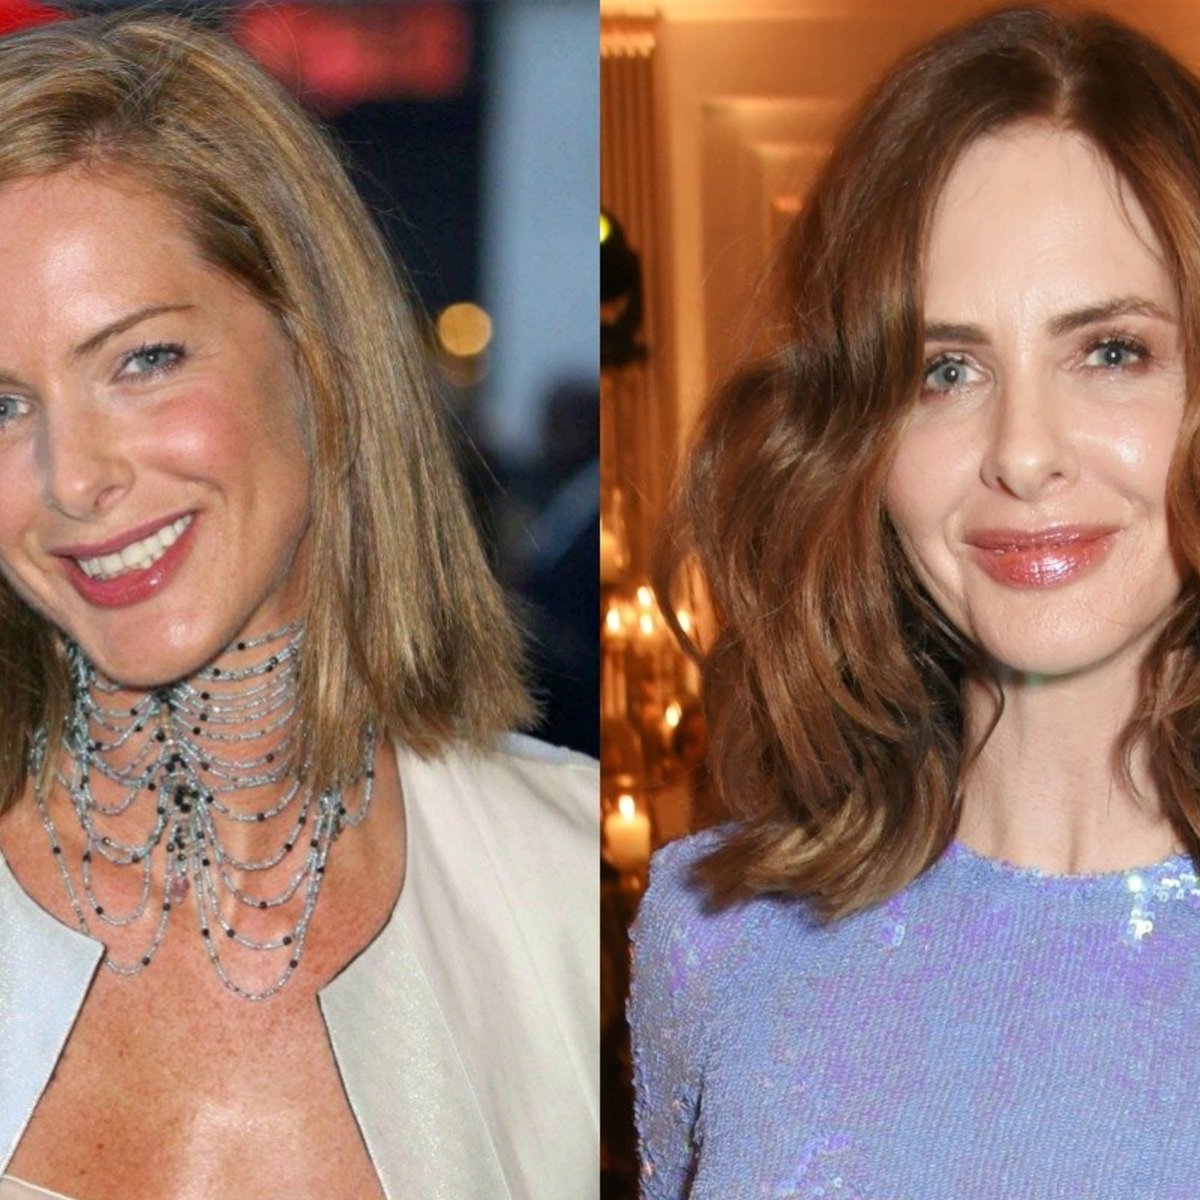 Behind-the-scenes of Trinny Woodall's interesting life.